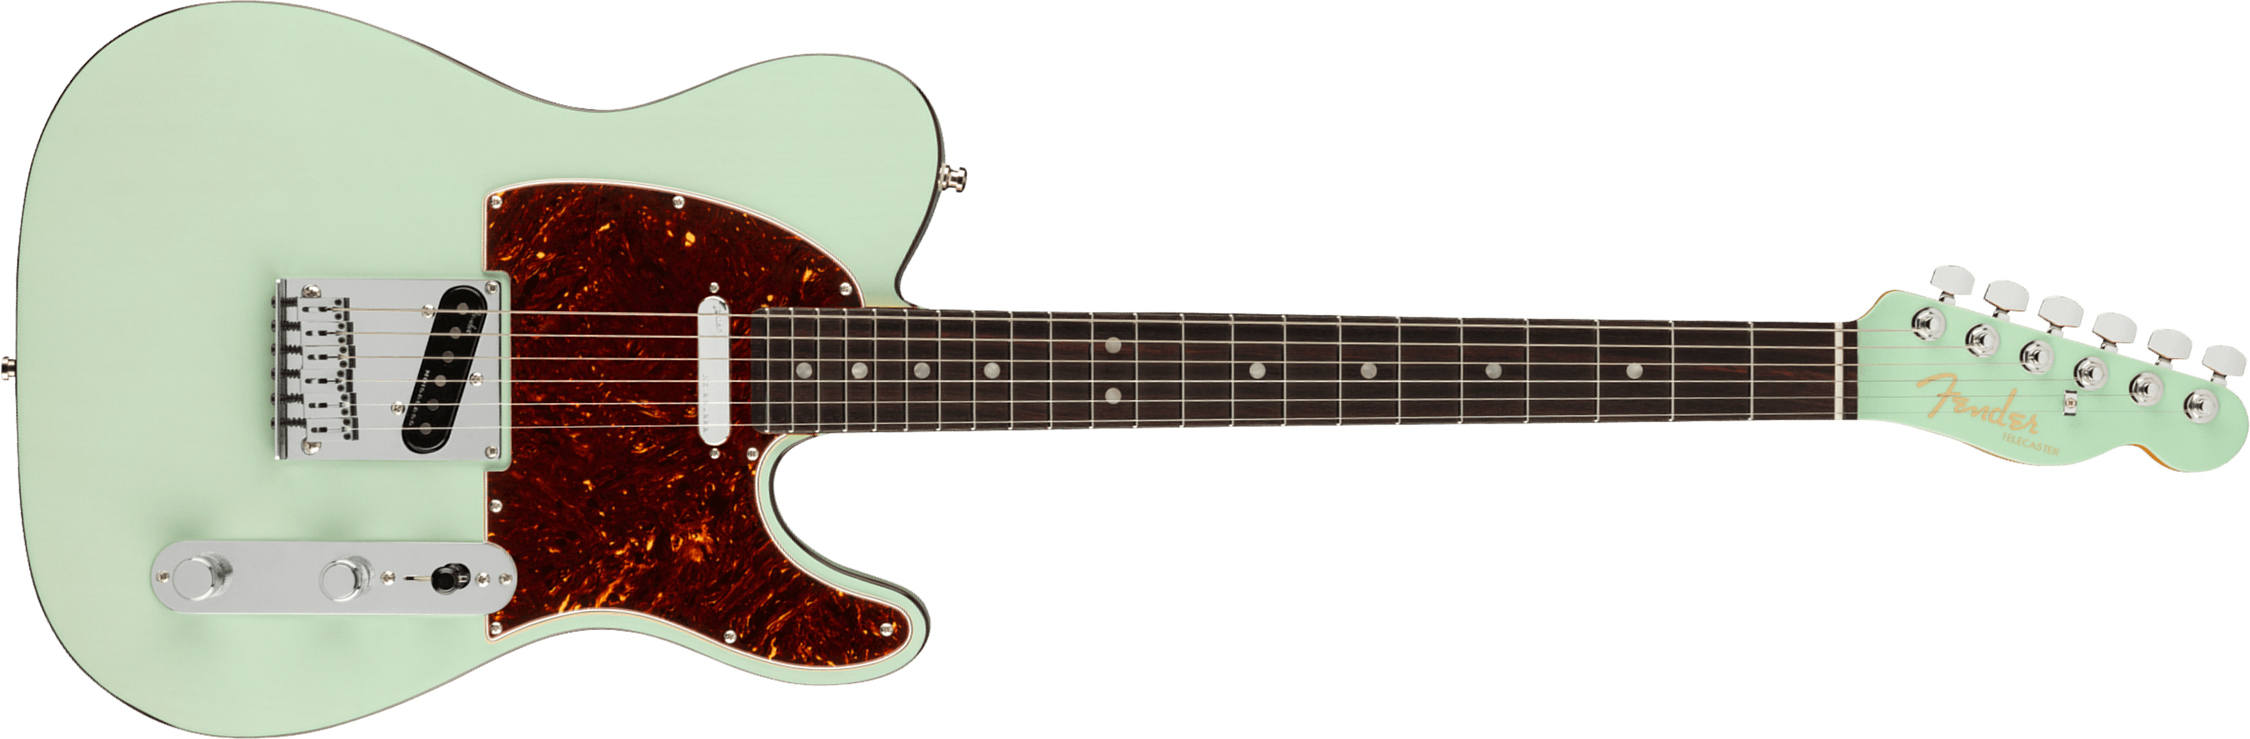 Fender Tele American Ultra Luxe Usa Rw +etui - Transparent Surf Green - Tel shape electric guitar - Main picture